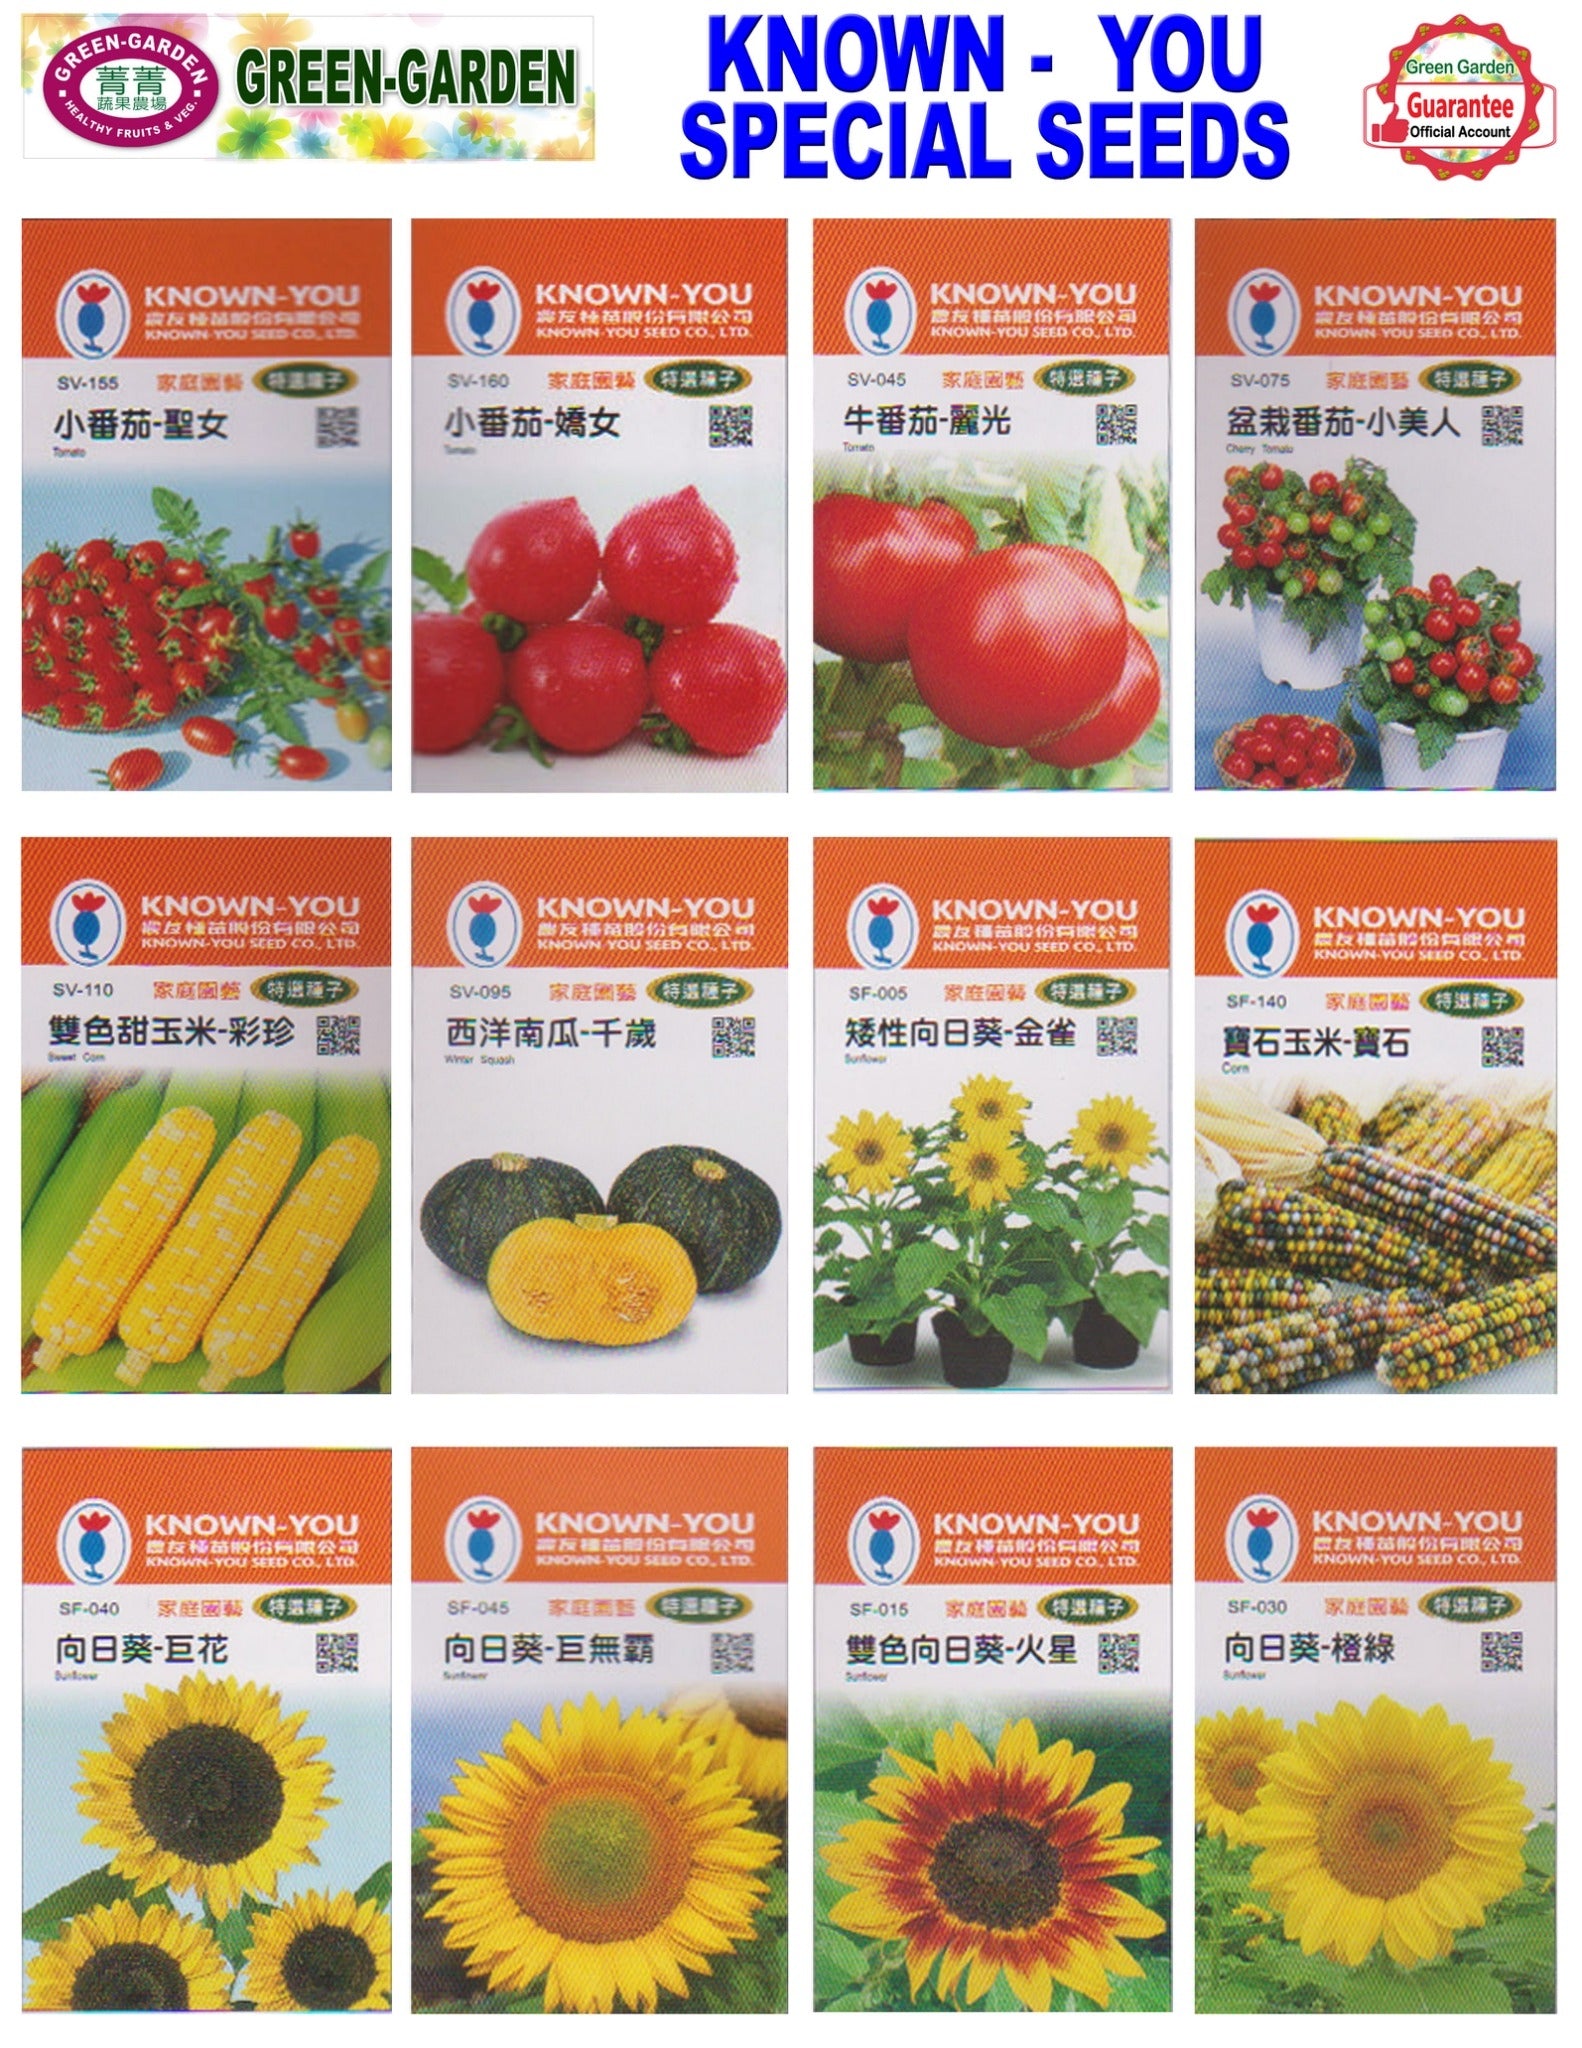 Known You Special Seeds (SV-155 Tomato)